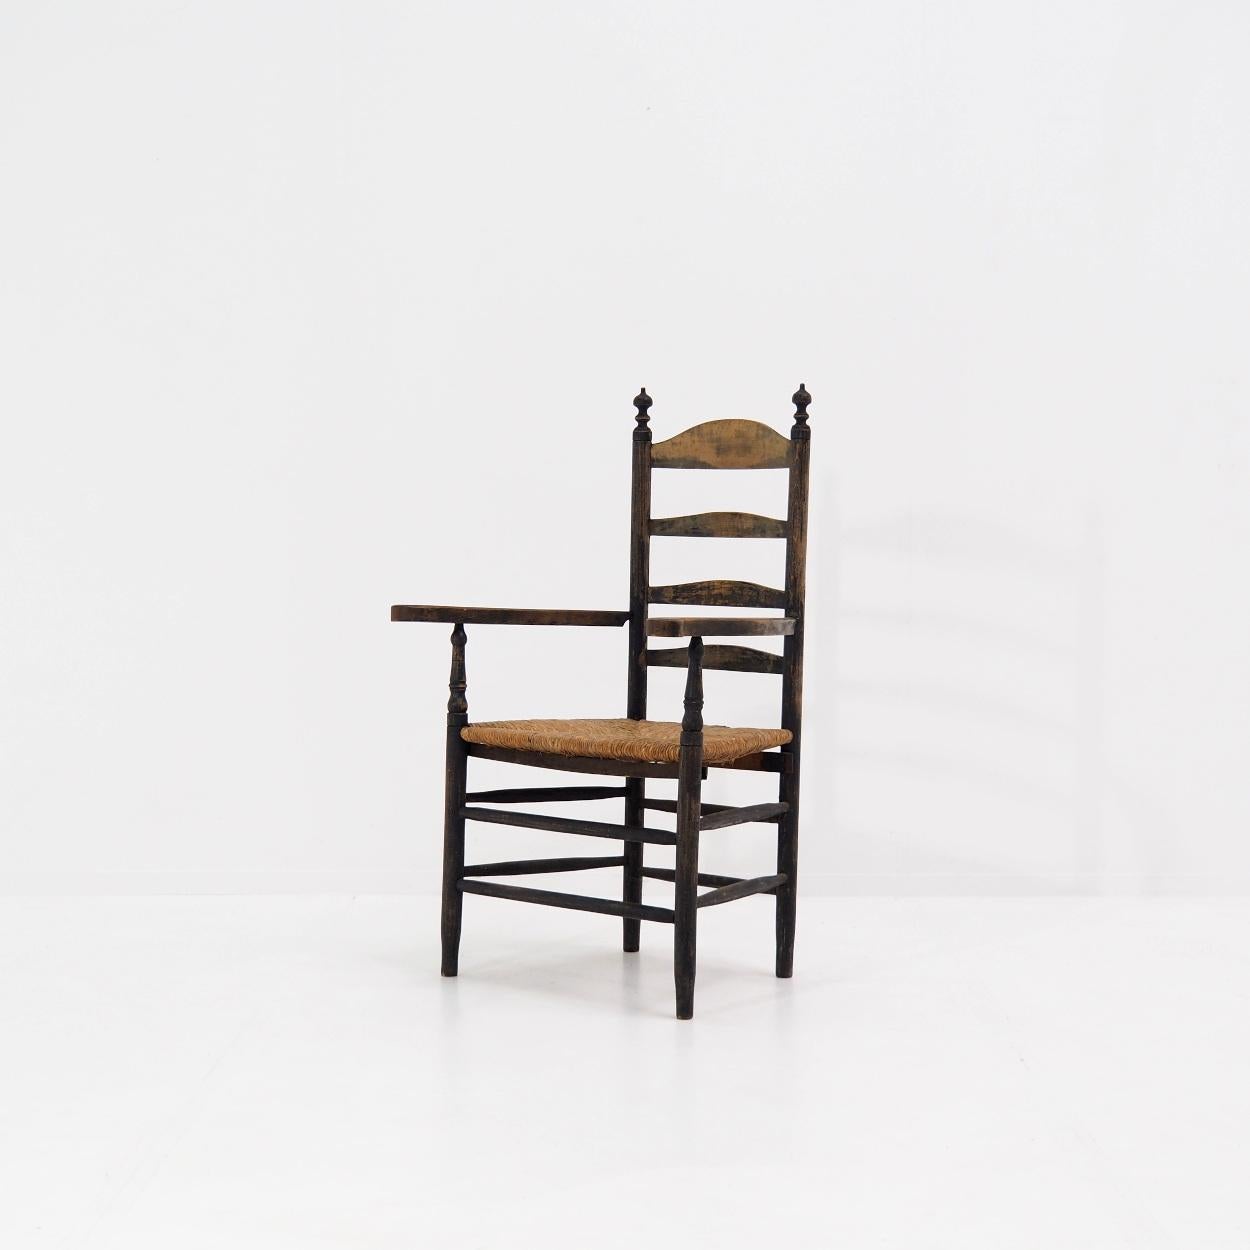 Antique ladder back chair from the Netherlands.

The chair still has its original patina from natural wear, with a paint that is a dark, almost black color. At the same time, the original wood is visible in other places.

The chair is made around